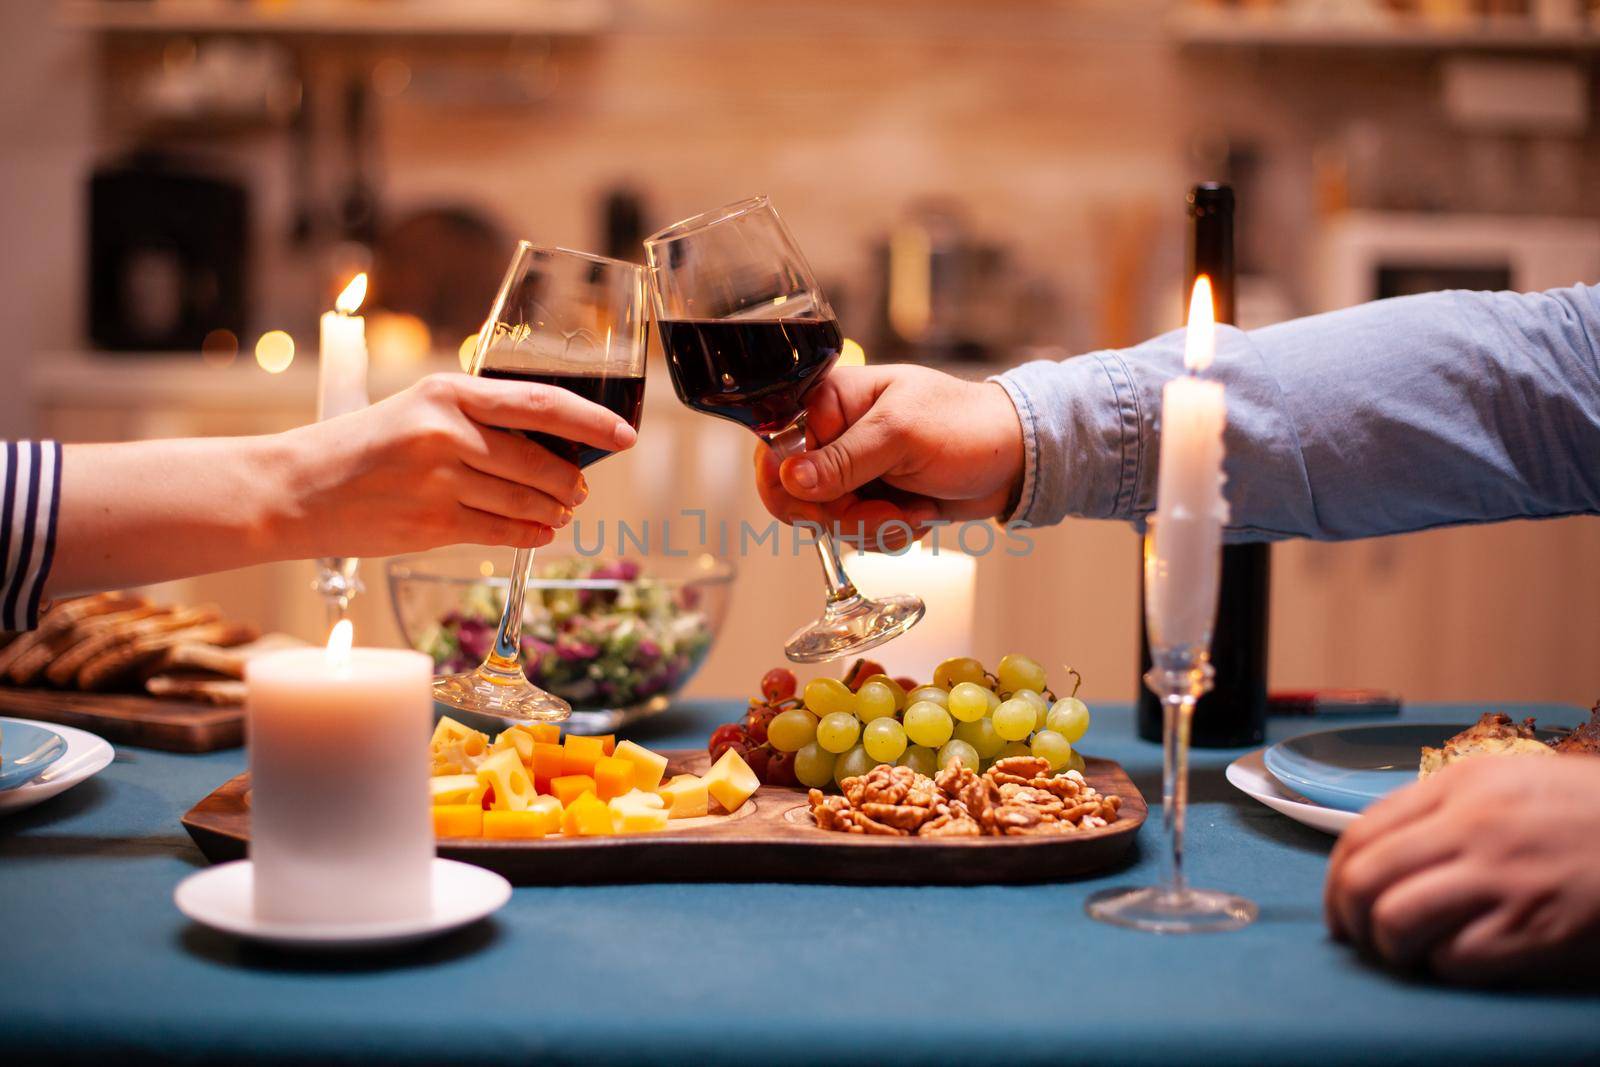 Celebrating anniversary of young couple in kitchen clinking glasses of red wine. Happy cheerful young couple dining together in the cozy kitchen, enjoying the meal.